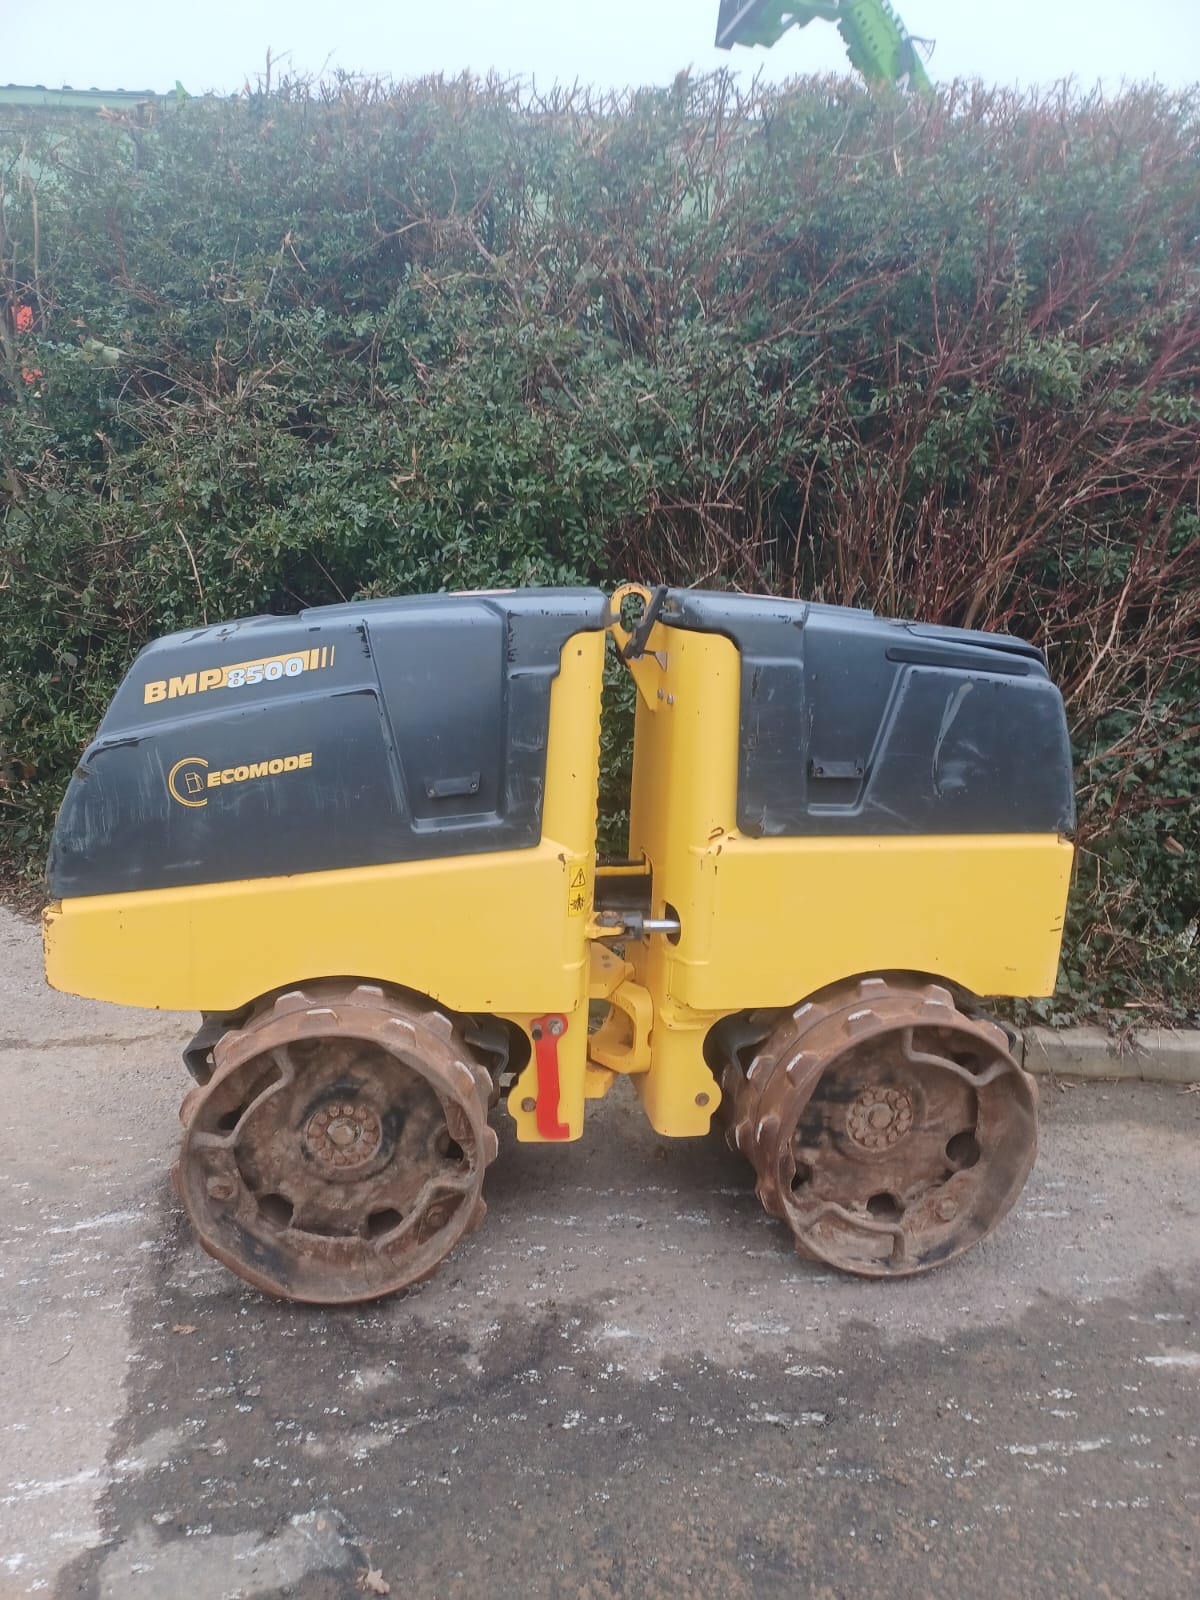 Used BOMAG BMP8500 for sale, year 2018